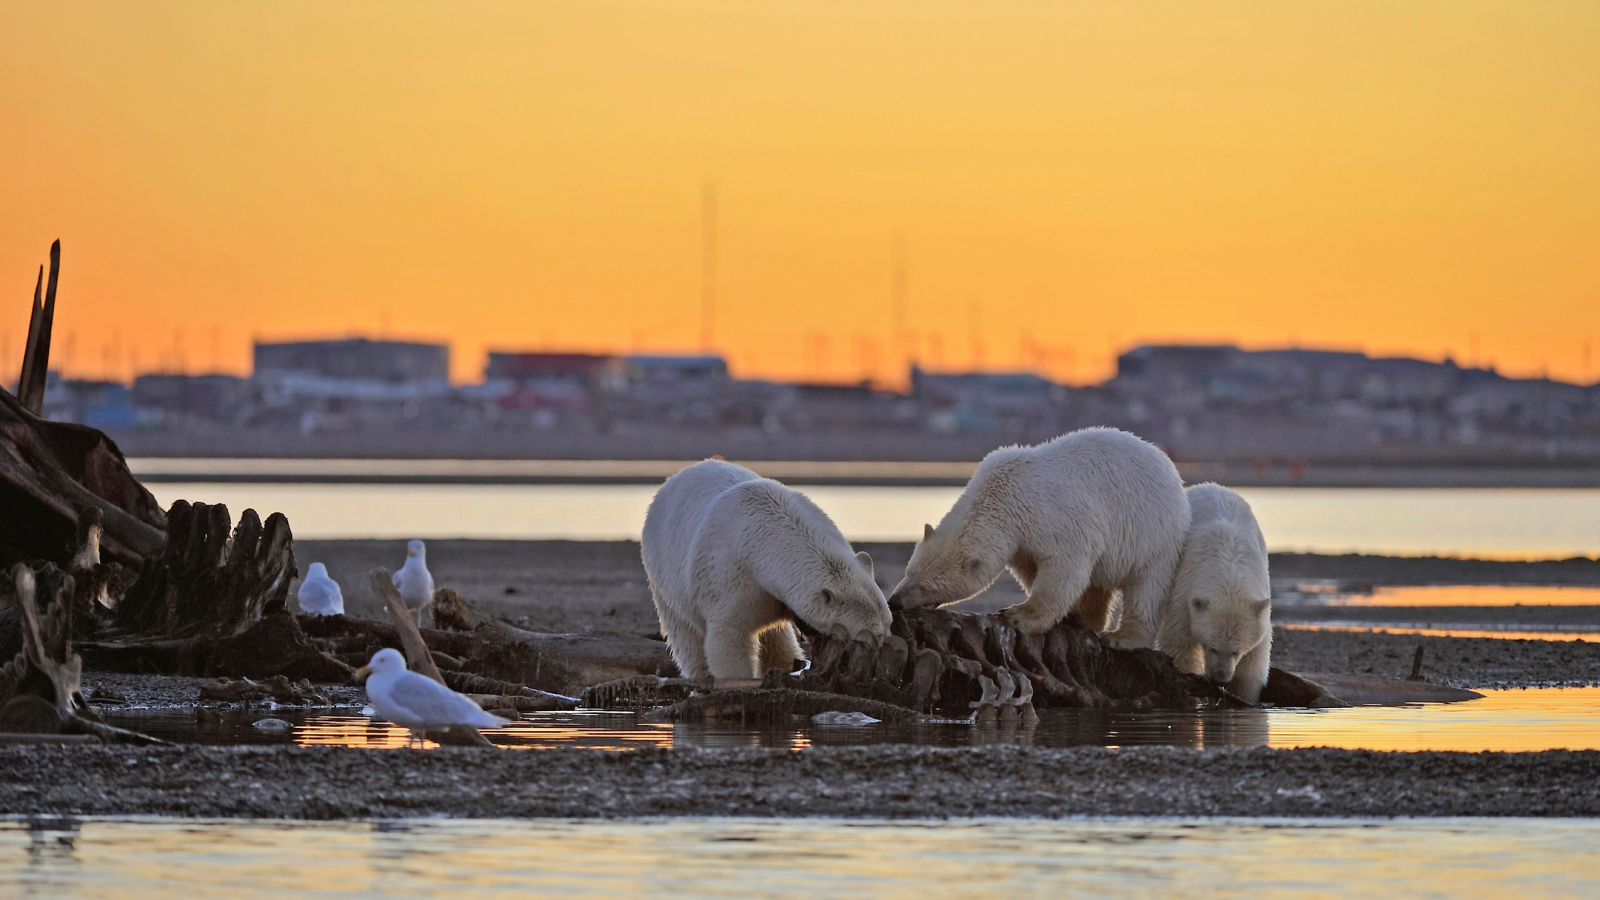 At sunset two polar bears are seen on a shoreline eating from a bony carcass.